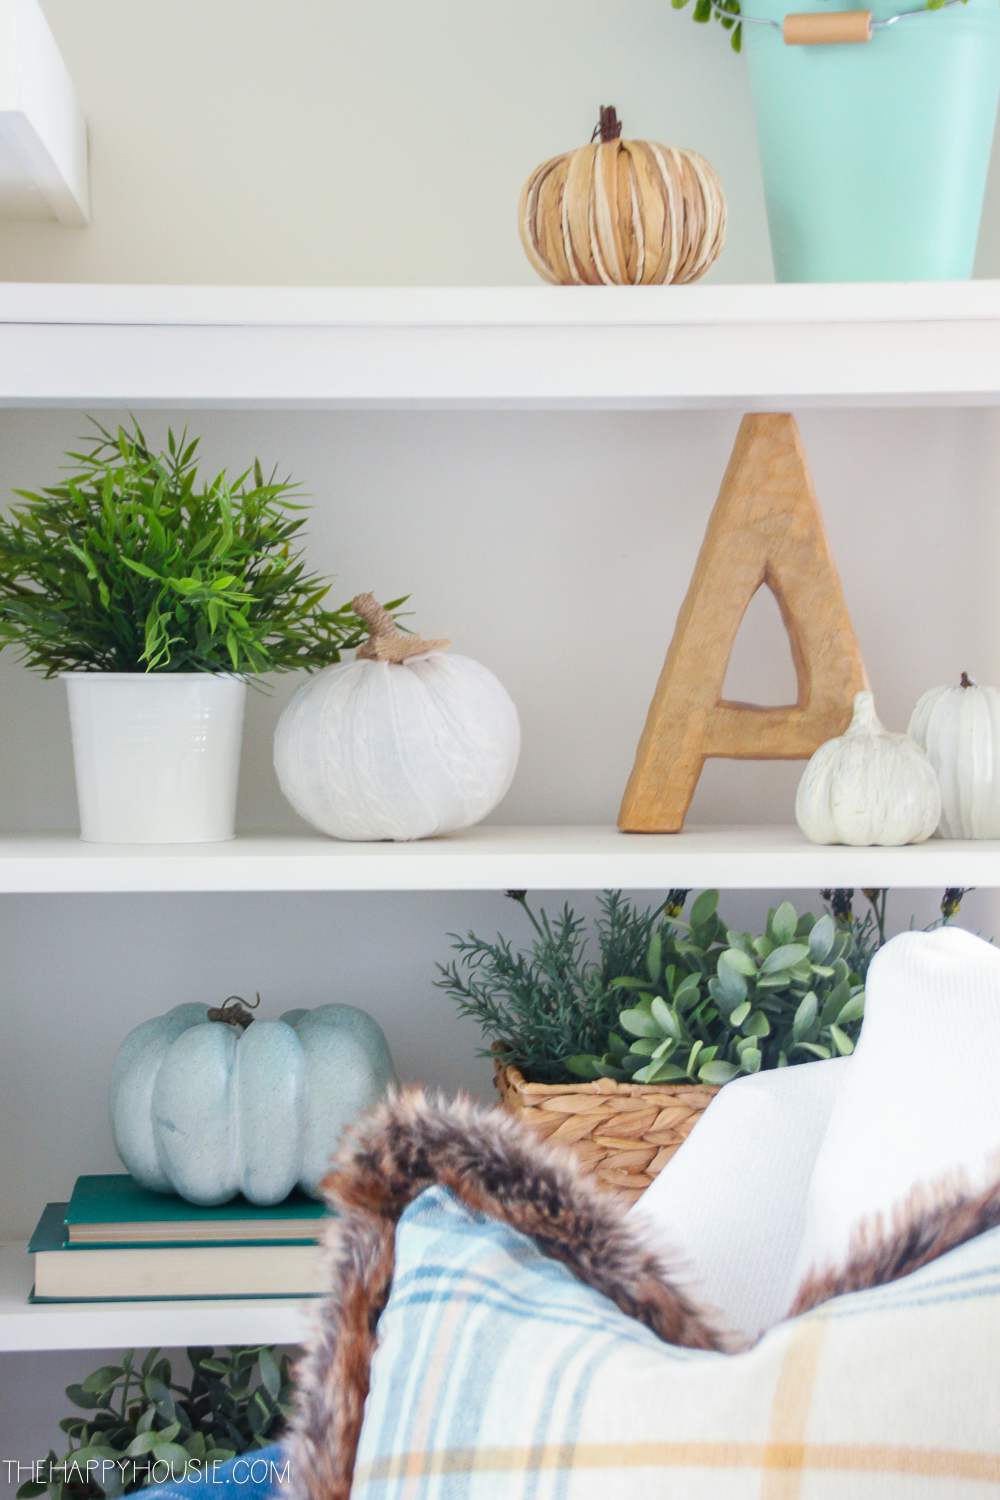 Small white pumpkins are on the shelf behind the chair.